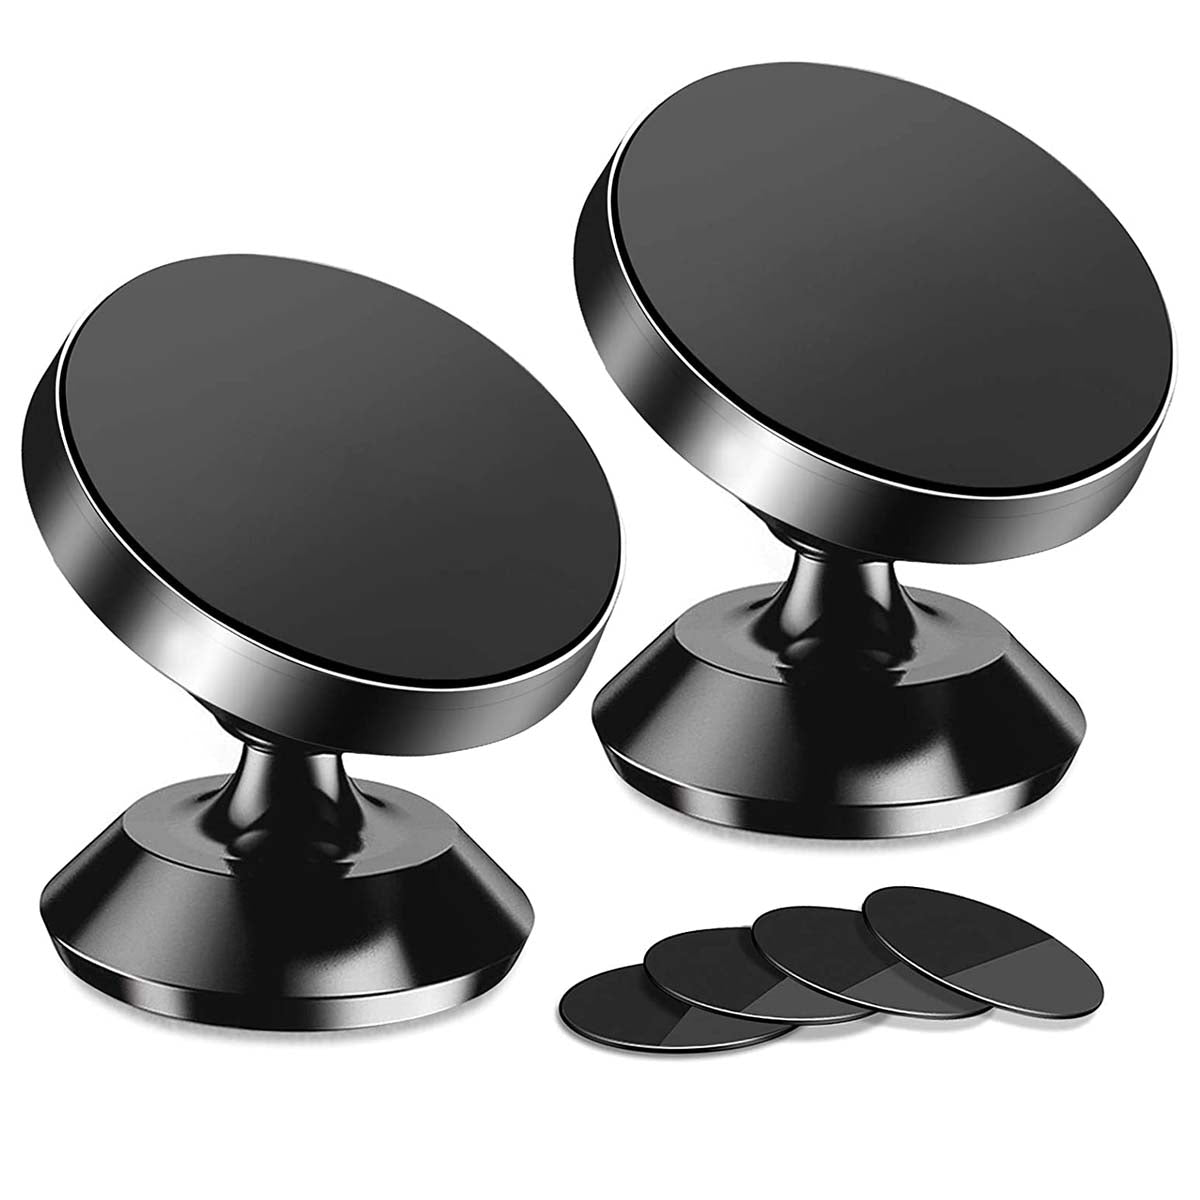 [2 Pack ] Magnetic Phone Mount, Custom For Cars, [ Super Strong Magnet ] [ with 4 Metal Plate ] car Magnetic Phone Holder, [ 360° Rotation ] Universal Dashboard car Mount Fits All Cell Phones, Car Accessories NS13982